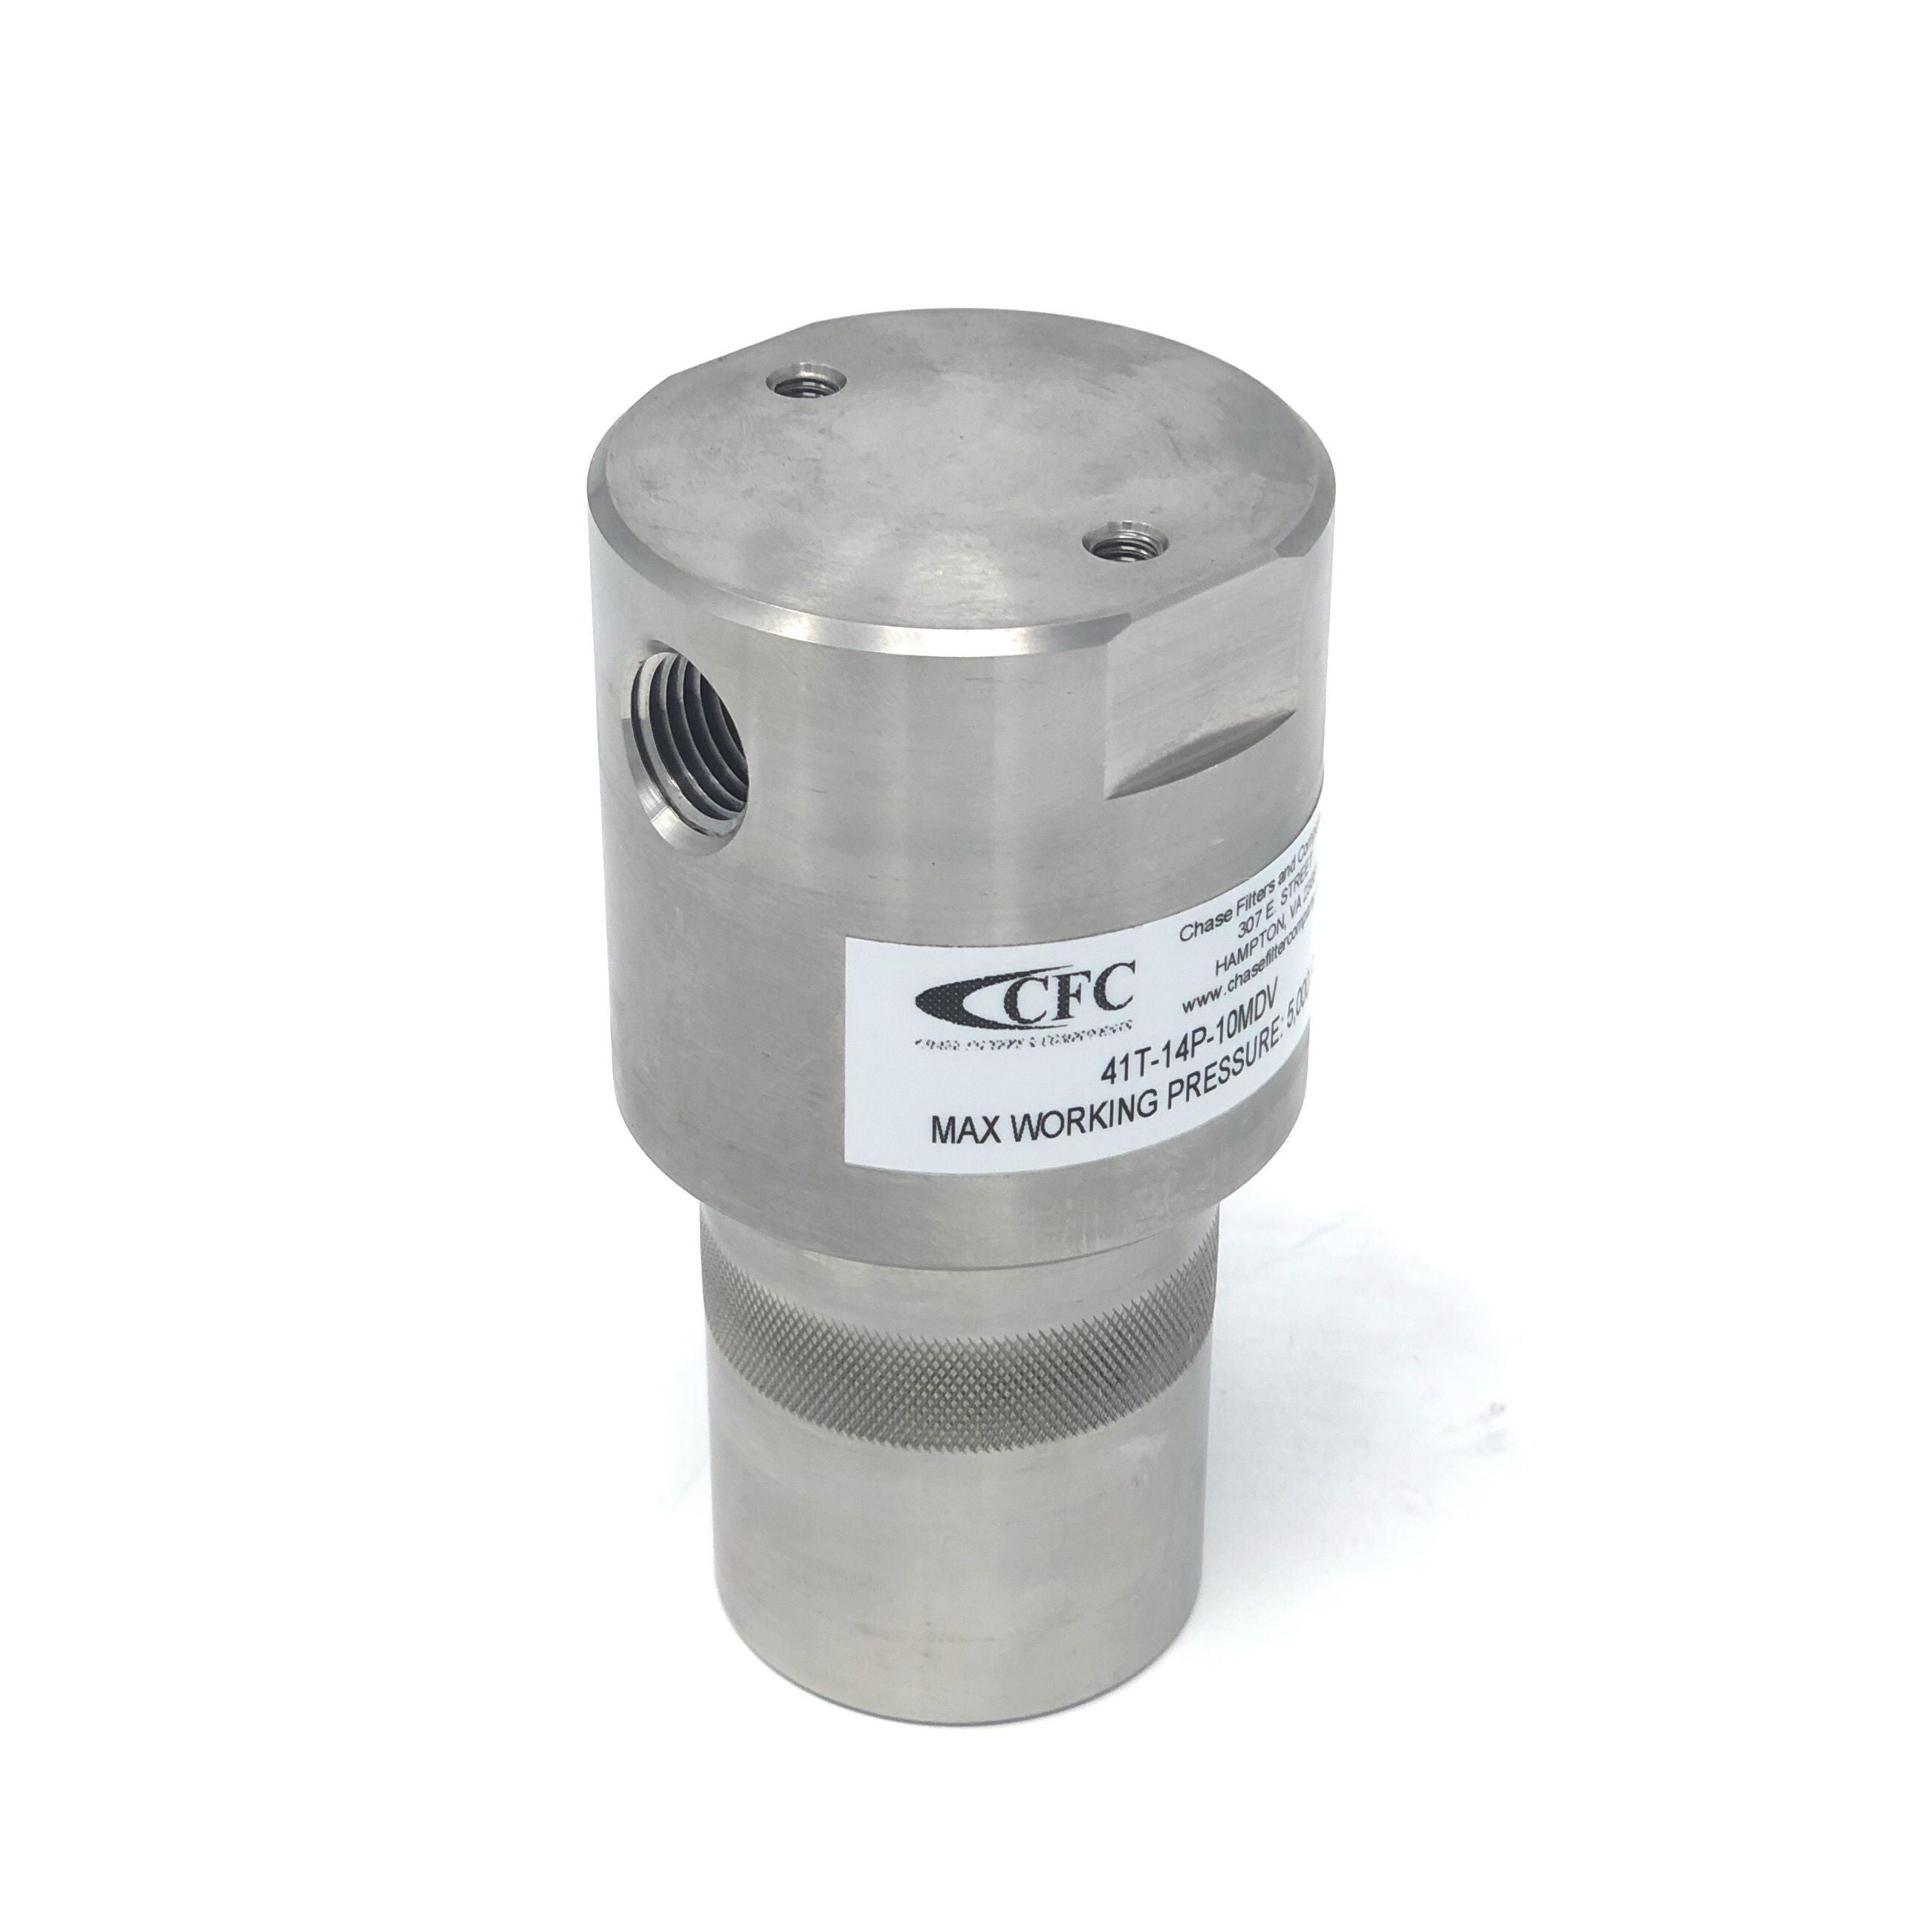 43P-76HP-150SEN : Chase Ultra High Pressure Inline Filter, 20000psi, 3/8" HP, 150 Micron, No Visual Indicator, No Bypass